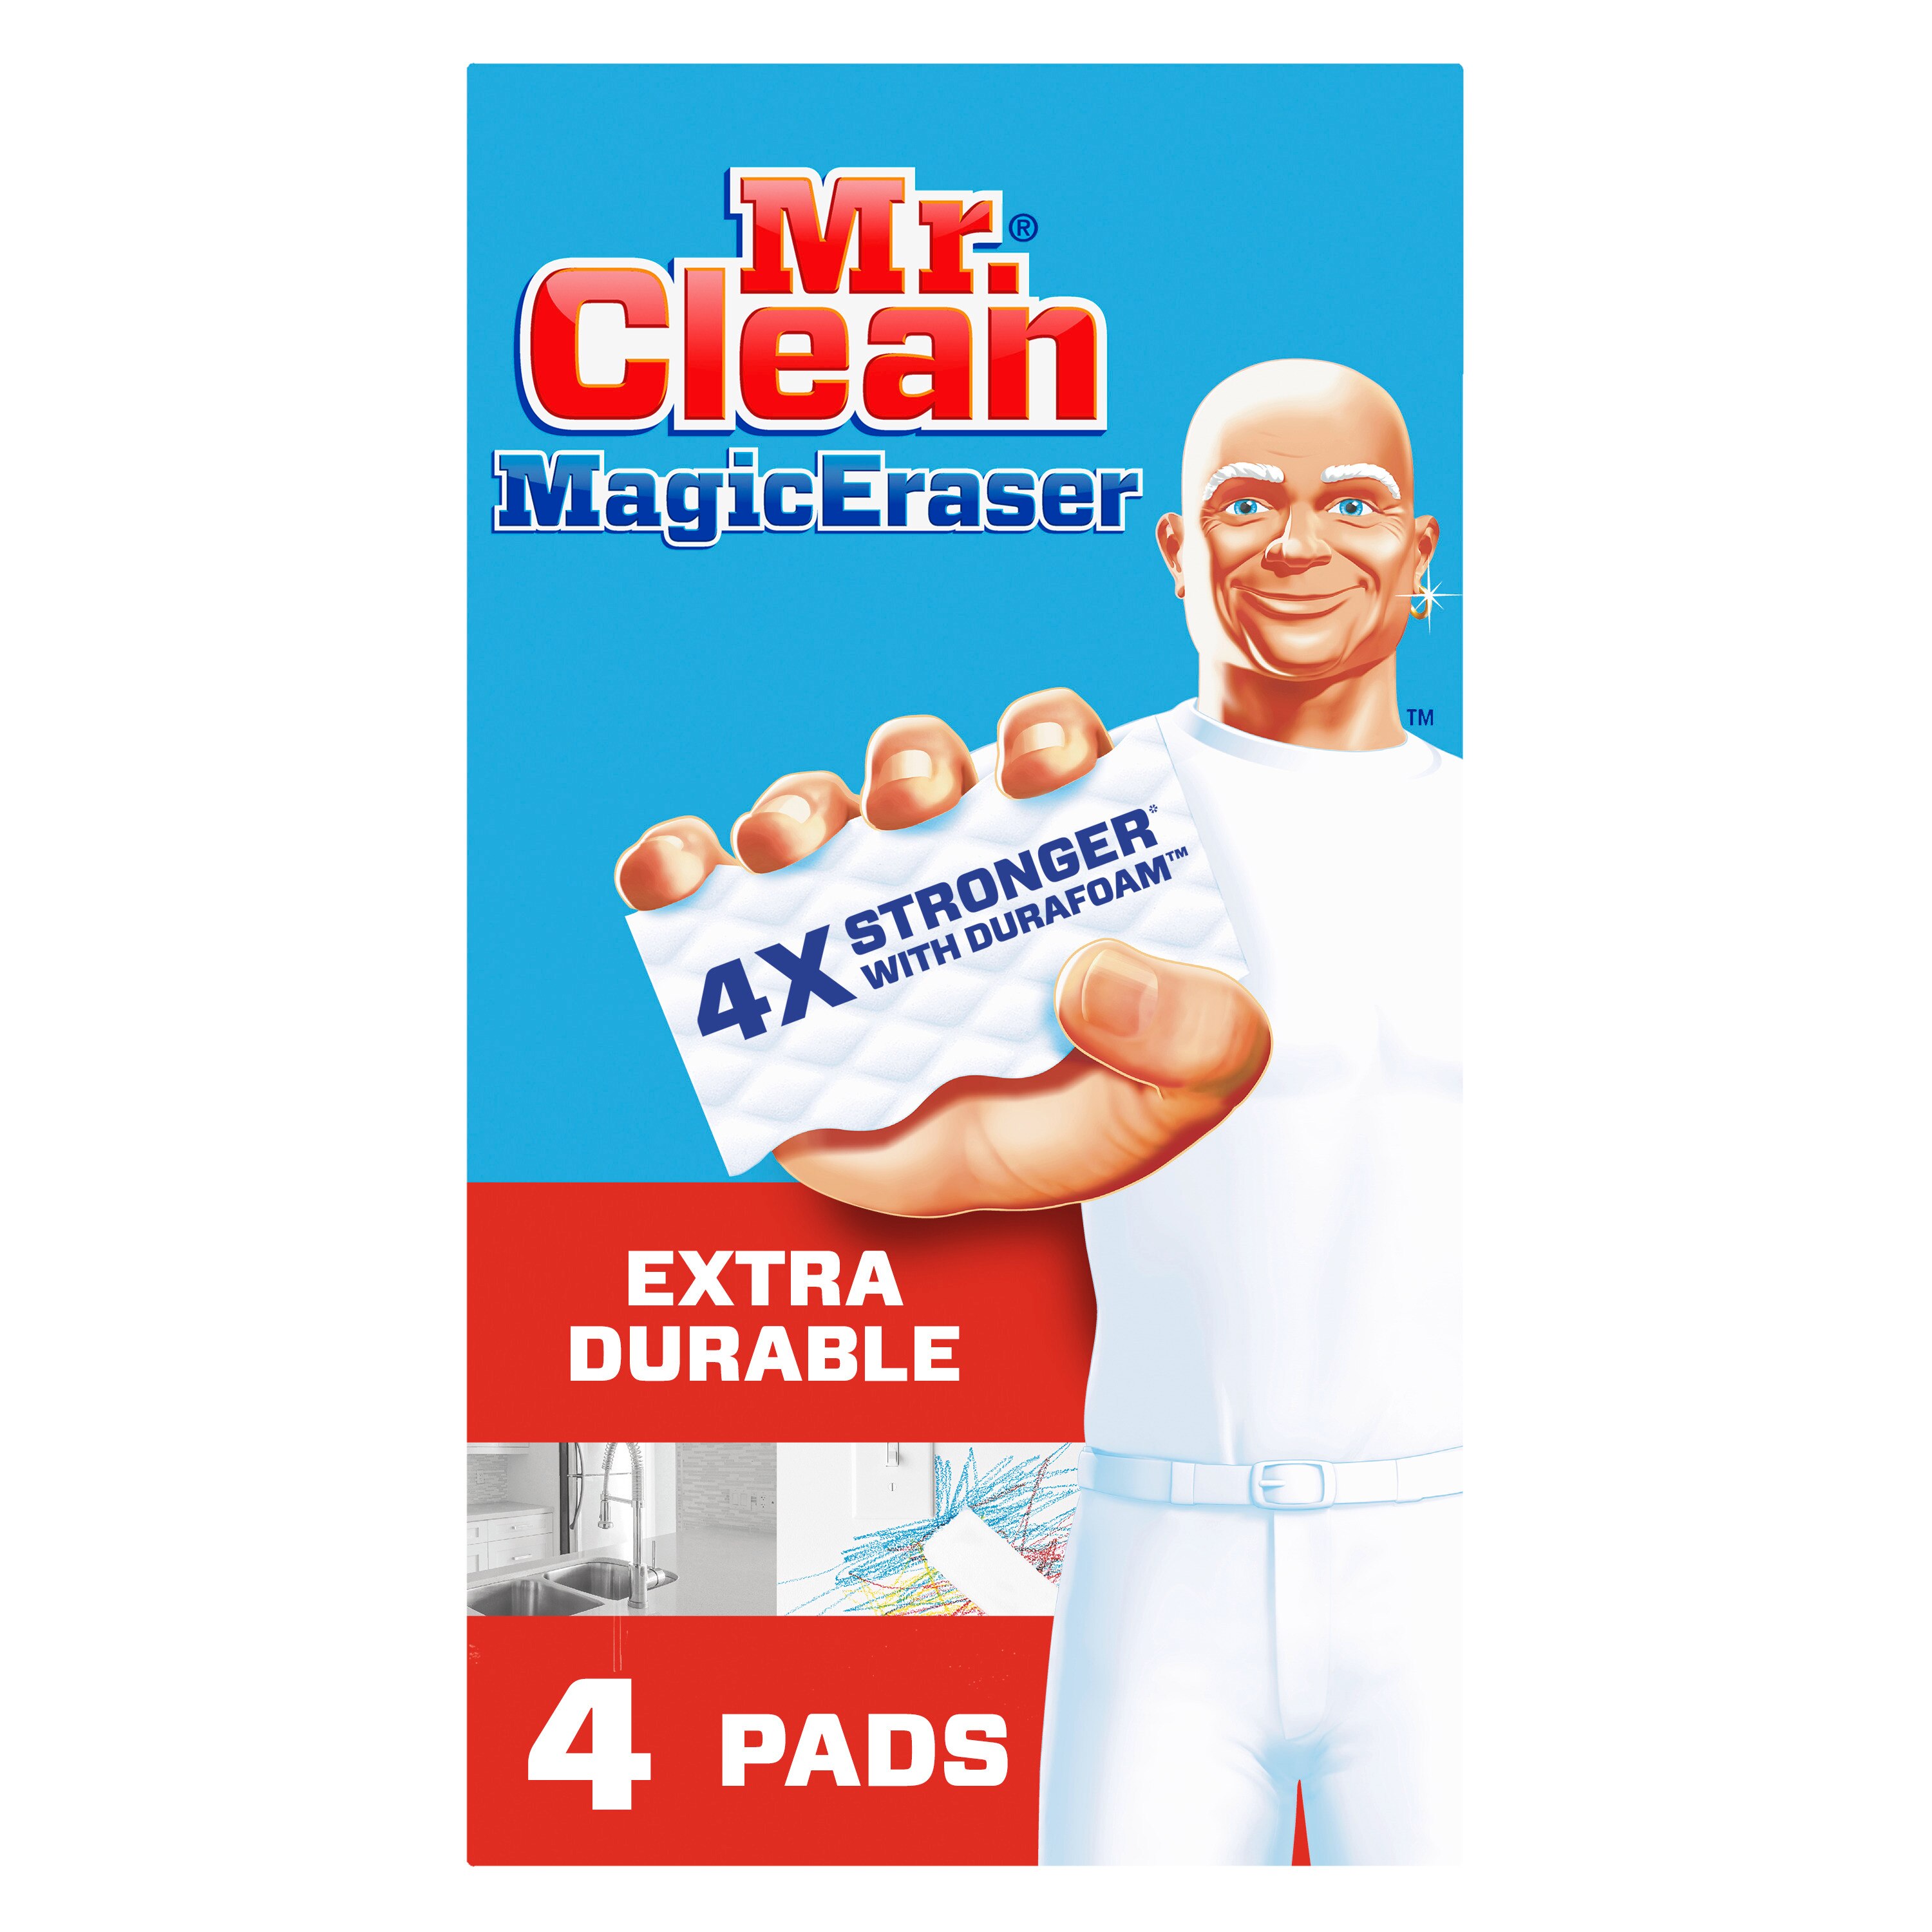 Mr. Clean Magic Eraser Extra Durable Cleaning Pads with Durafoam, 4 CT